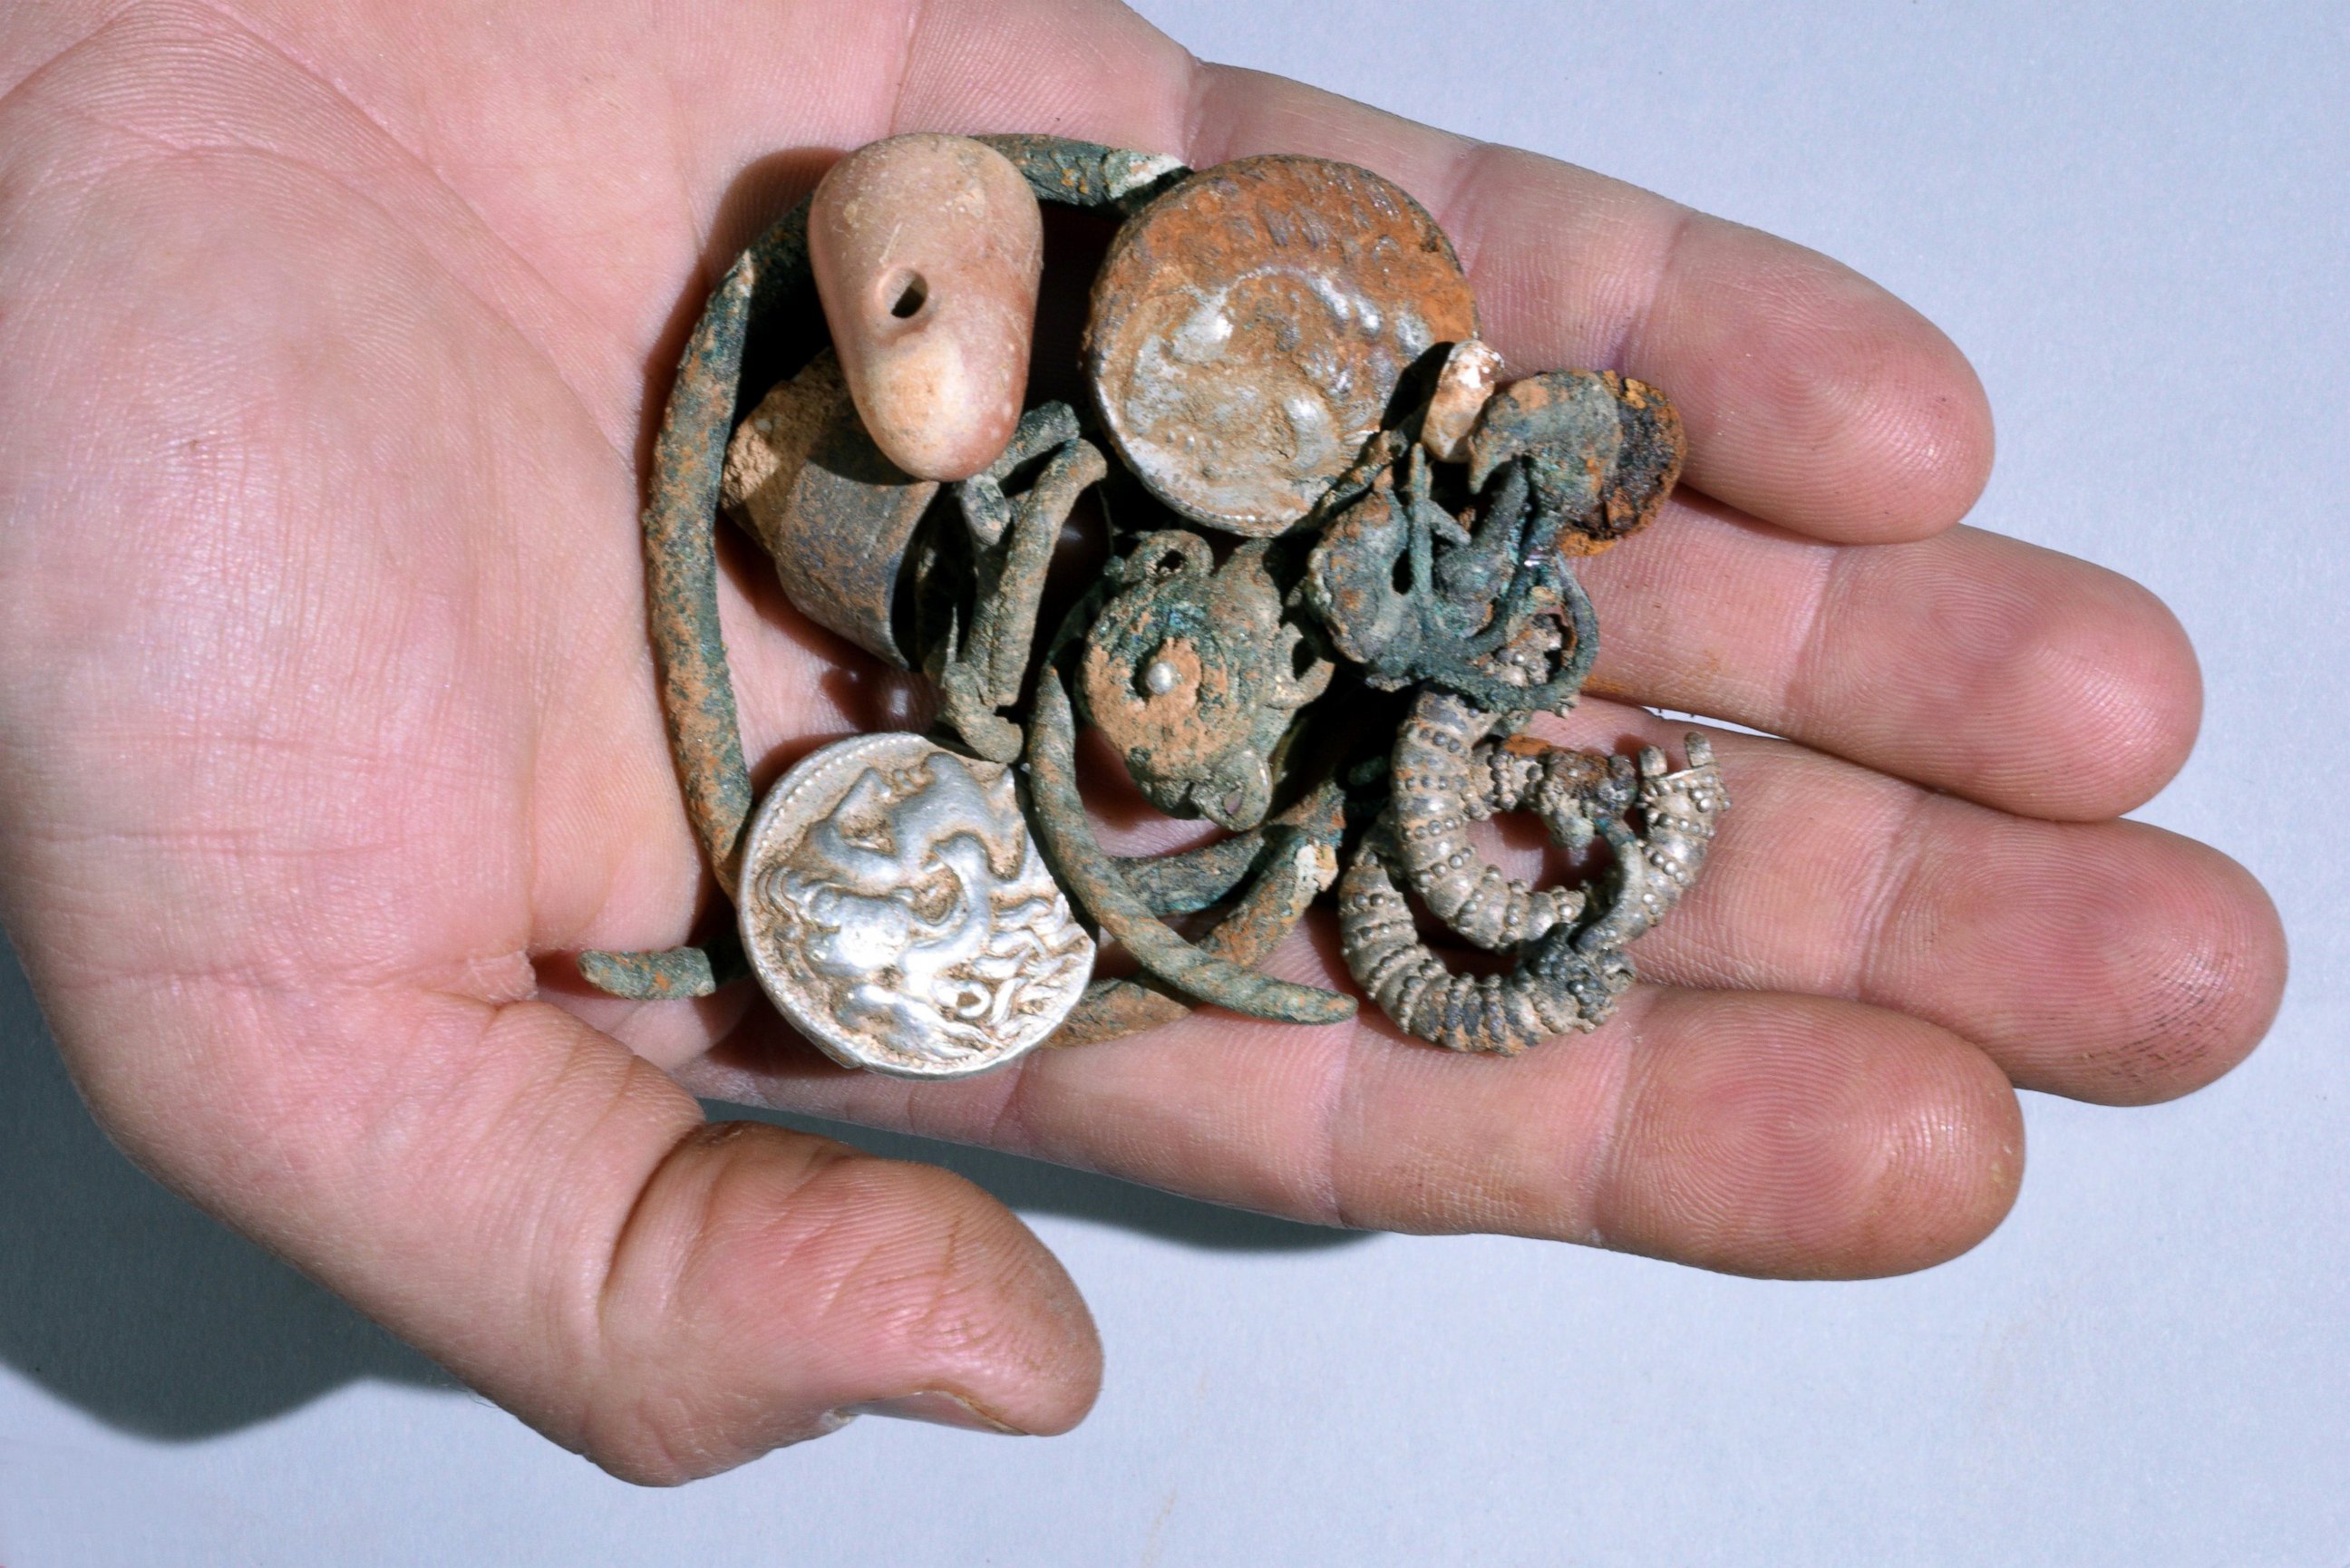 PHOTO: A photograph from the Israel Antiquities Authority shows silver objects found in a cave in northern Israel.